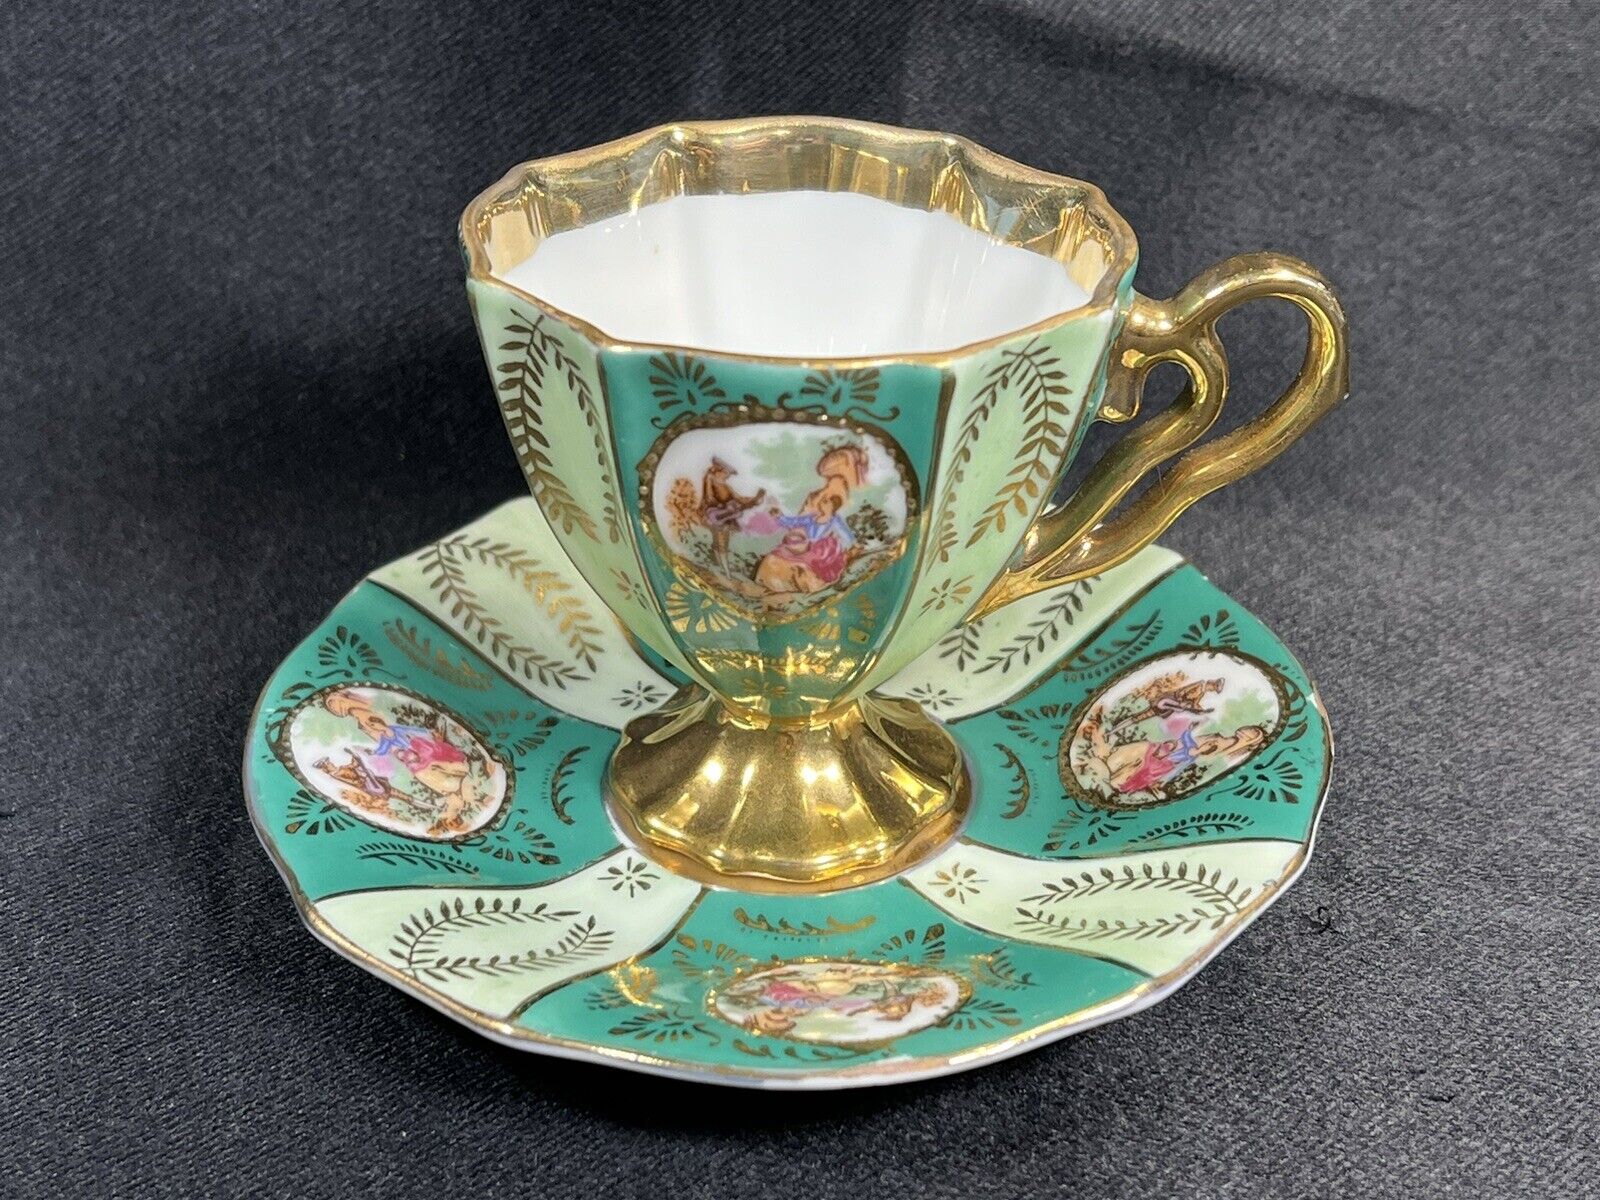 ANTIQUE ROYAL VIENNA CUP /SAUCER ROYAL GREE COURTING SERENADING COUPLE GOLD GILT